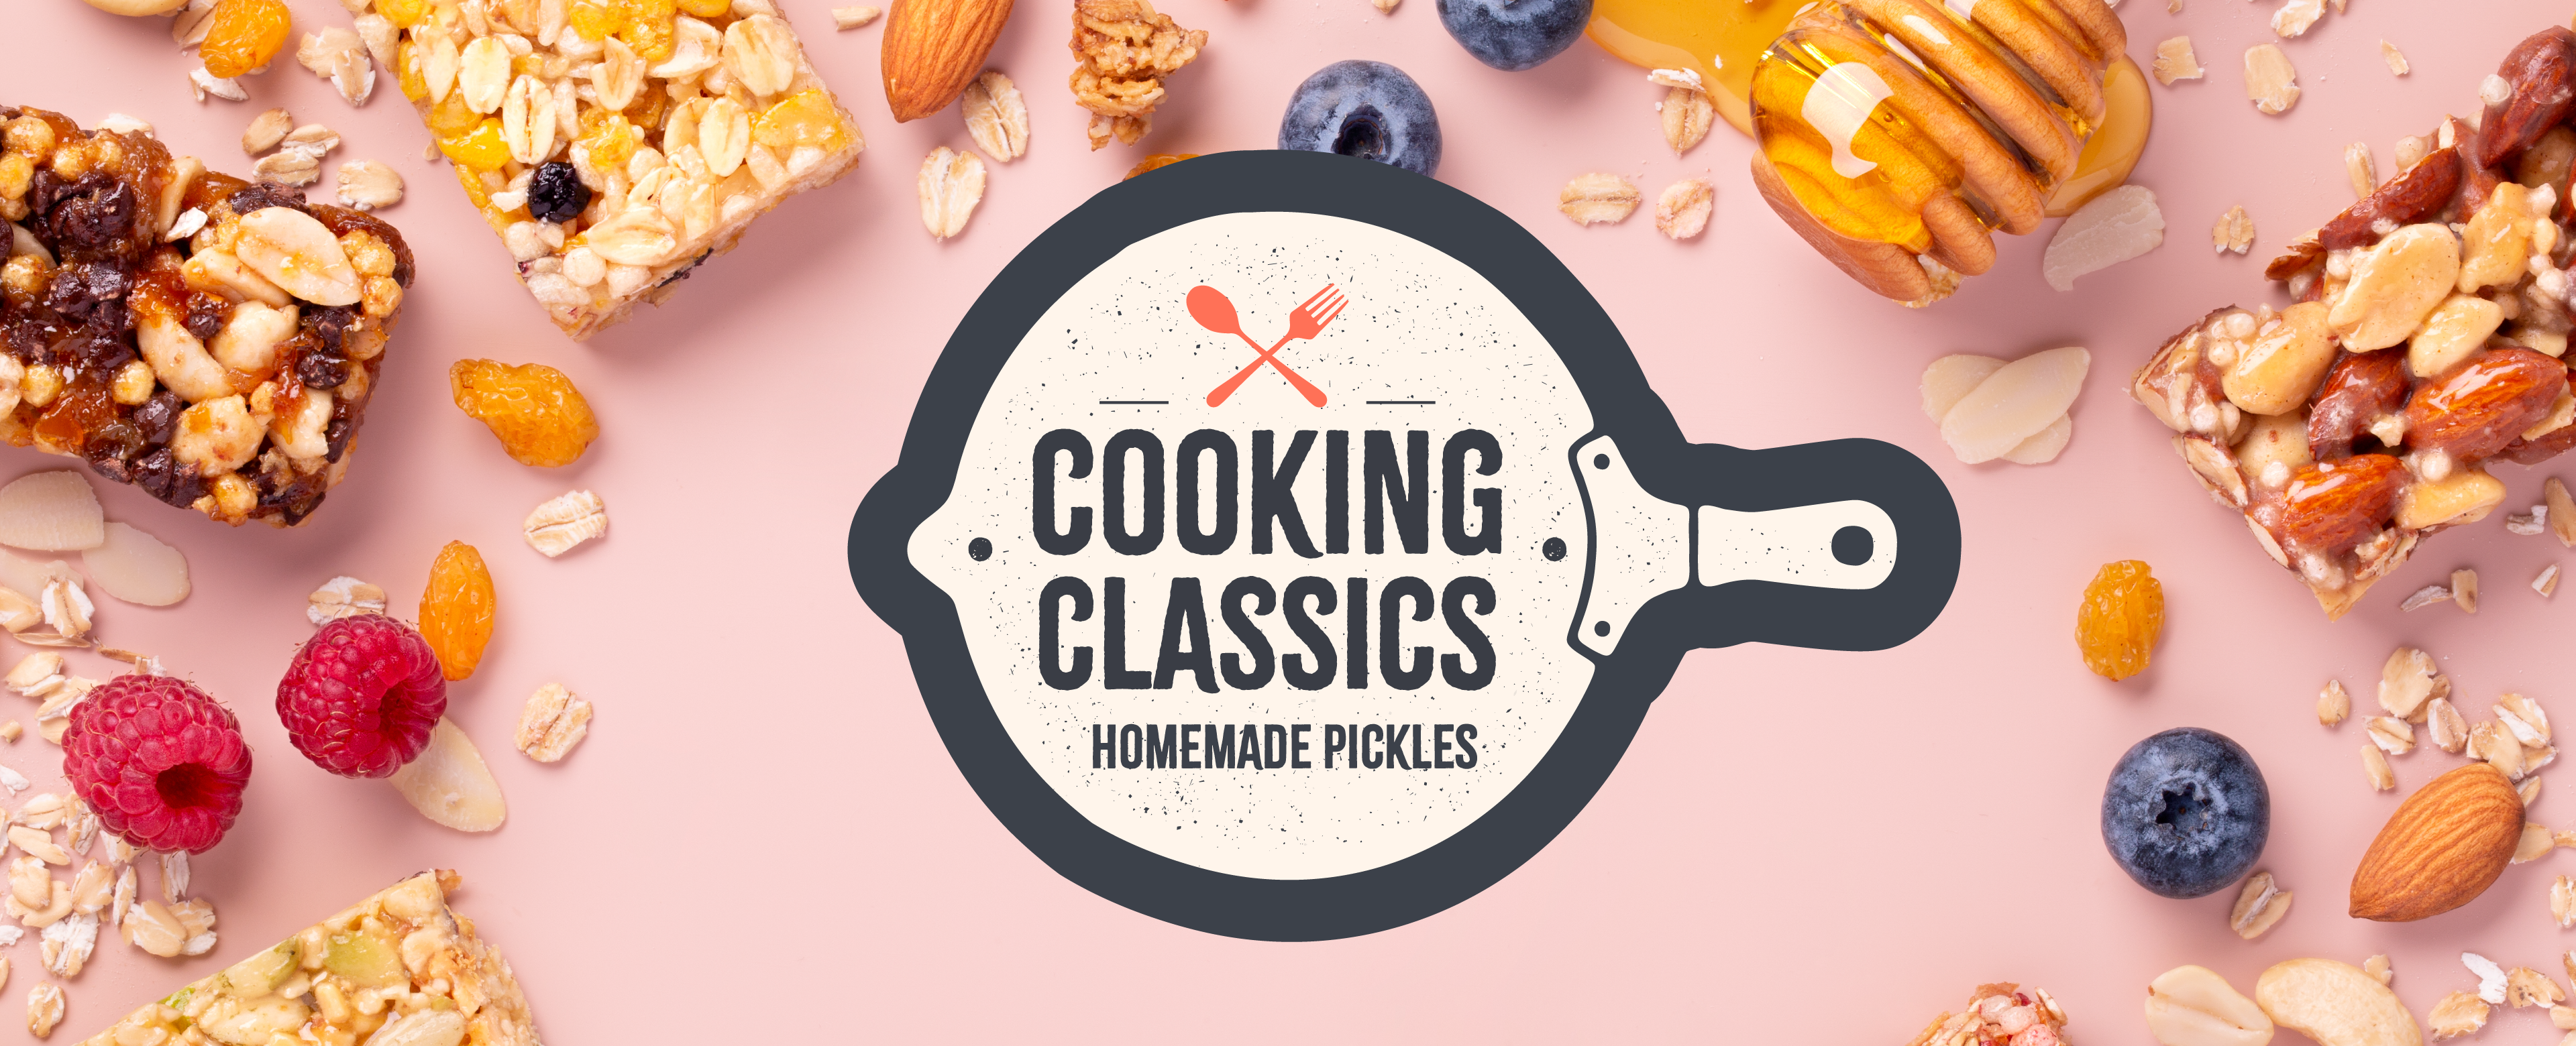 Cooking Classics: Homemade Pickles